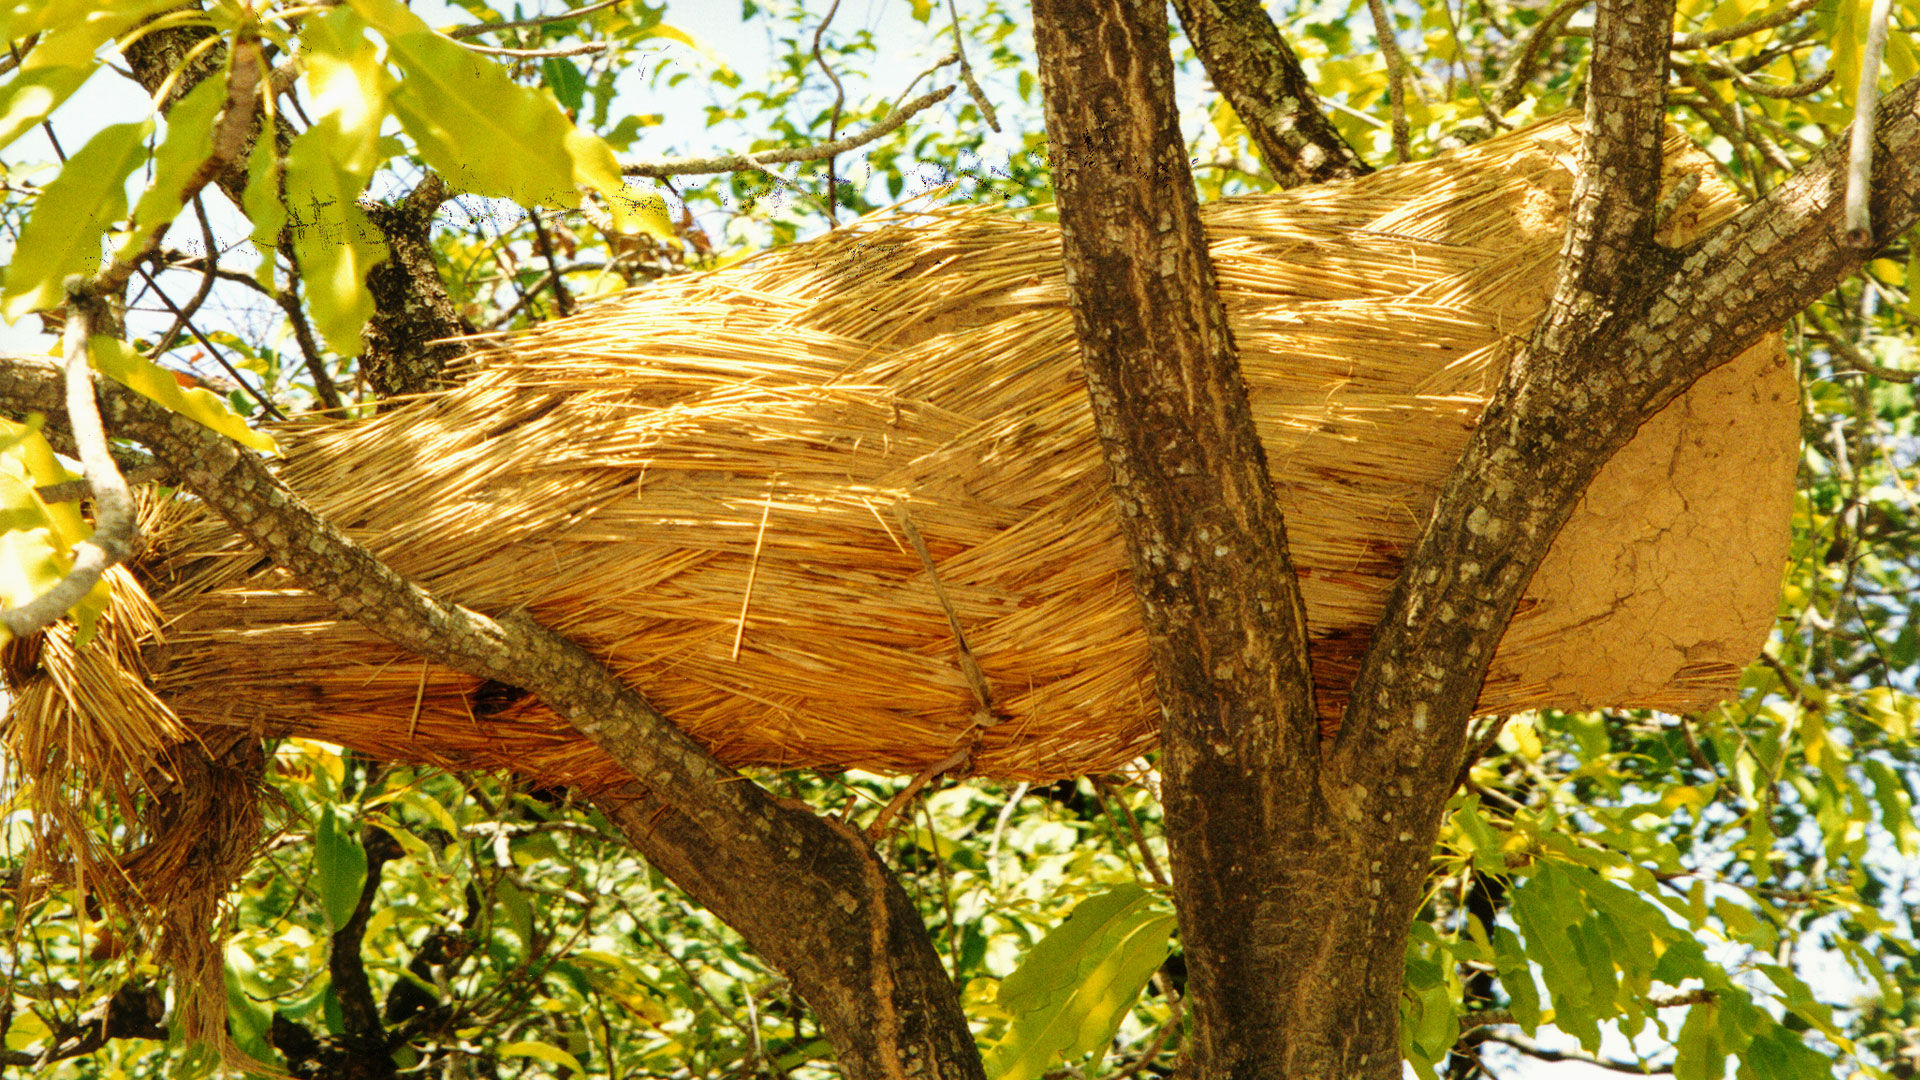 beehive shell in a tree